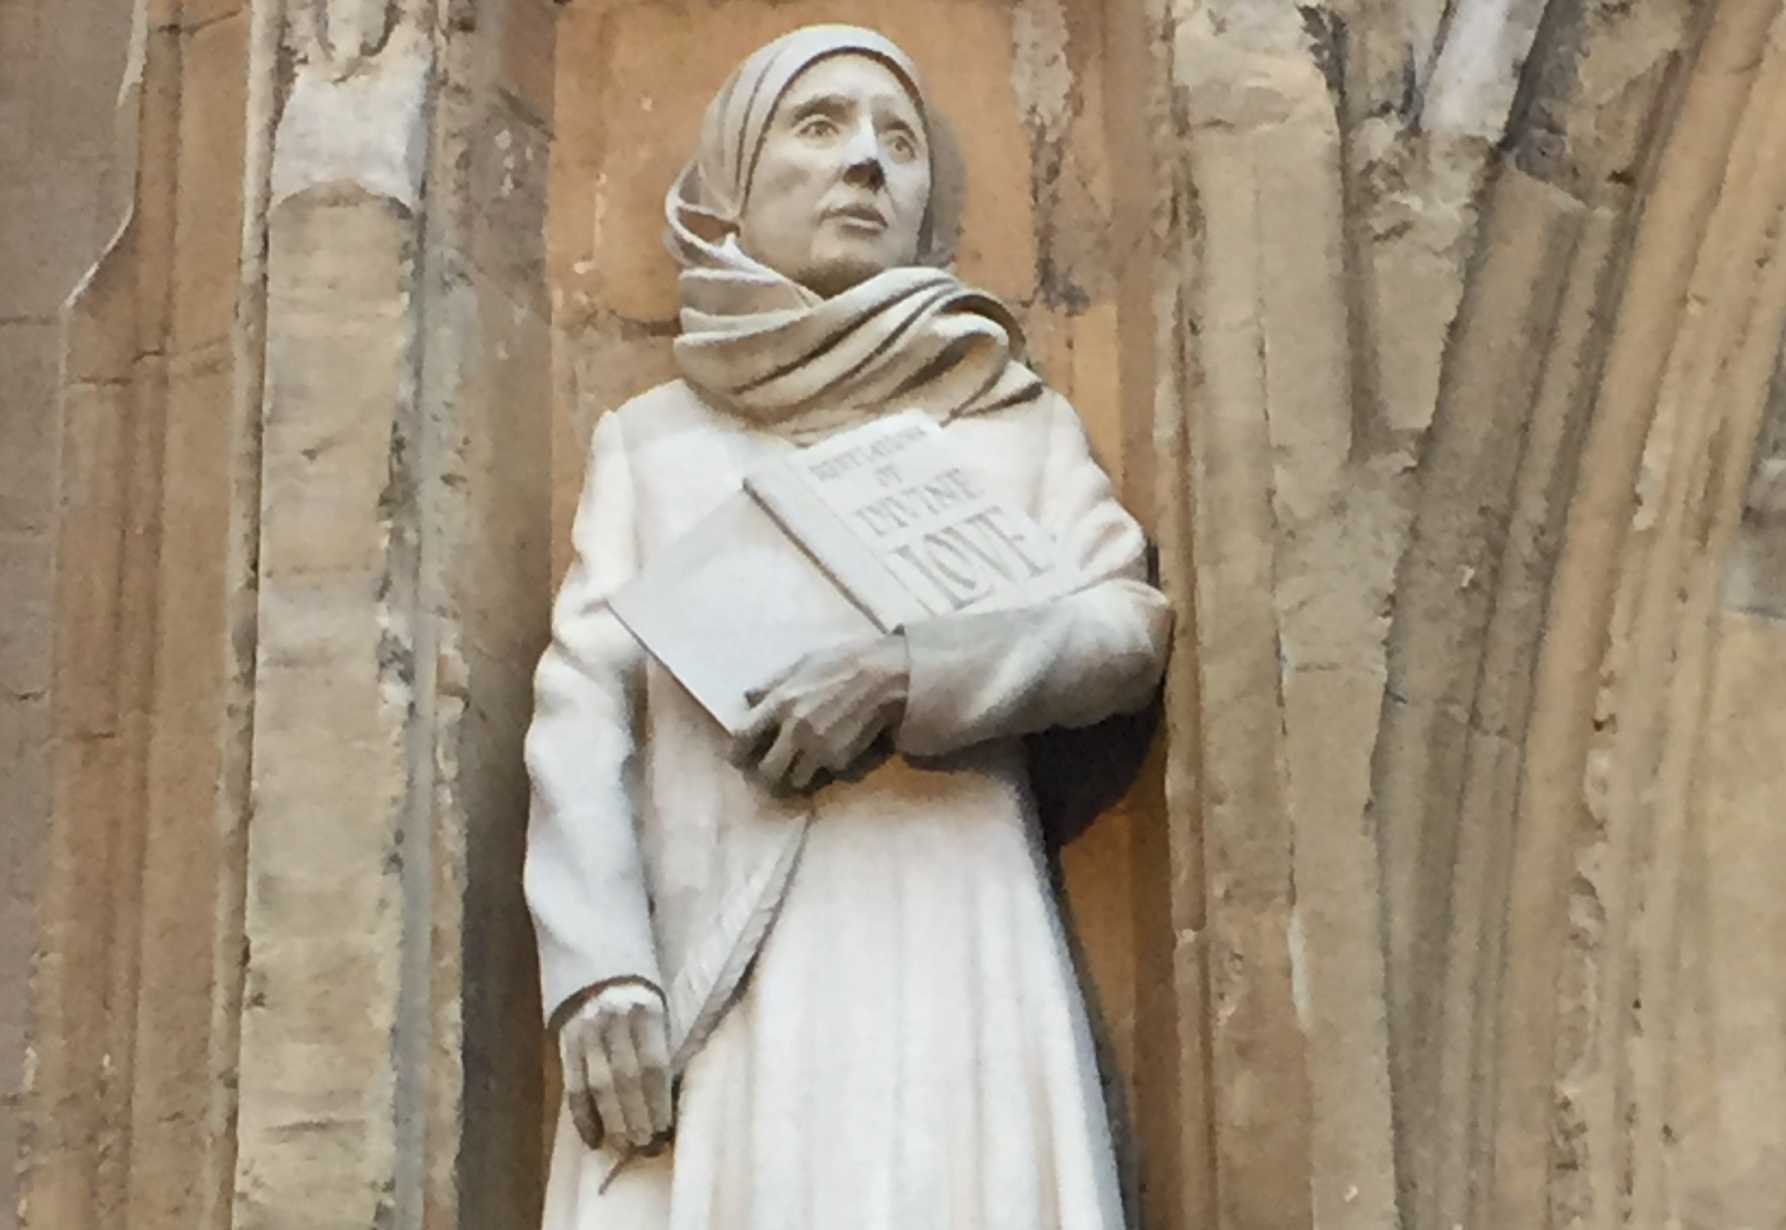 Pope praises Julian of Norwich as example of faith and service